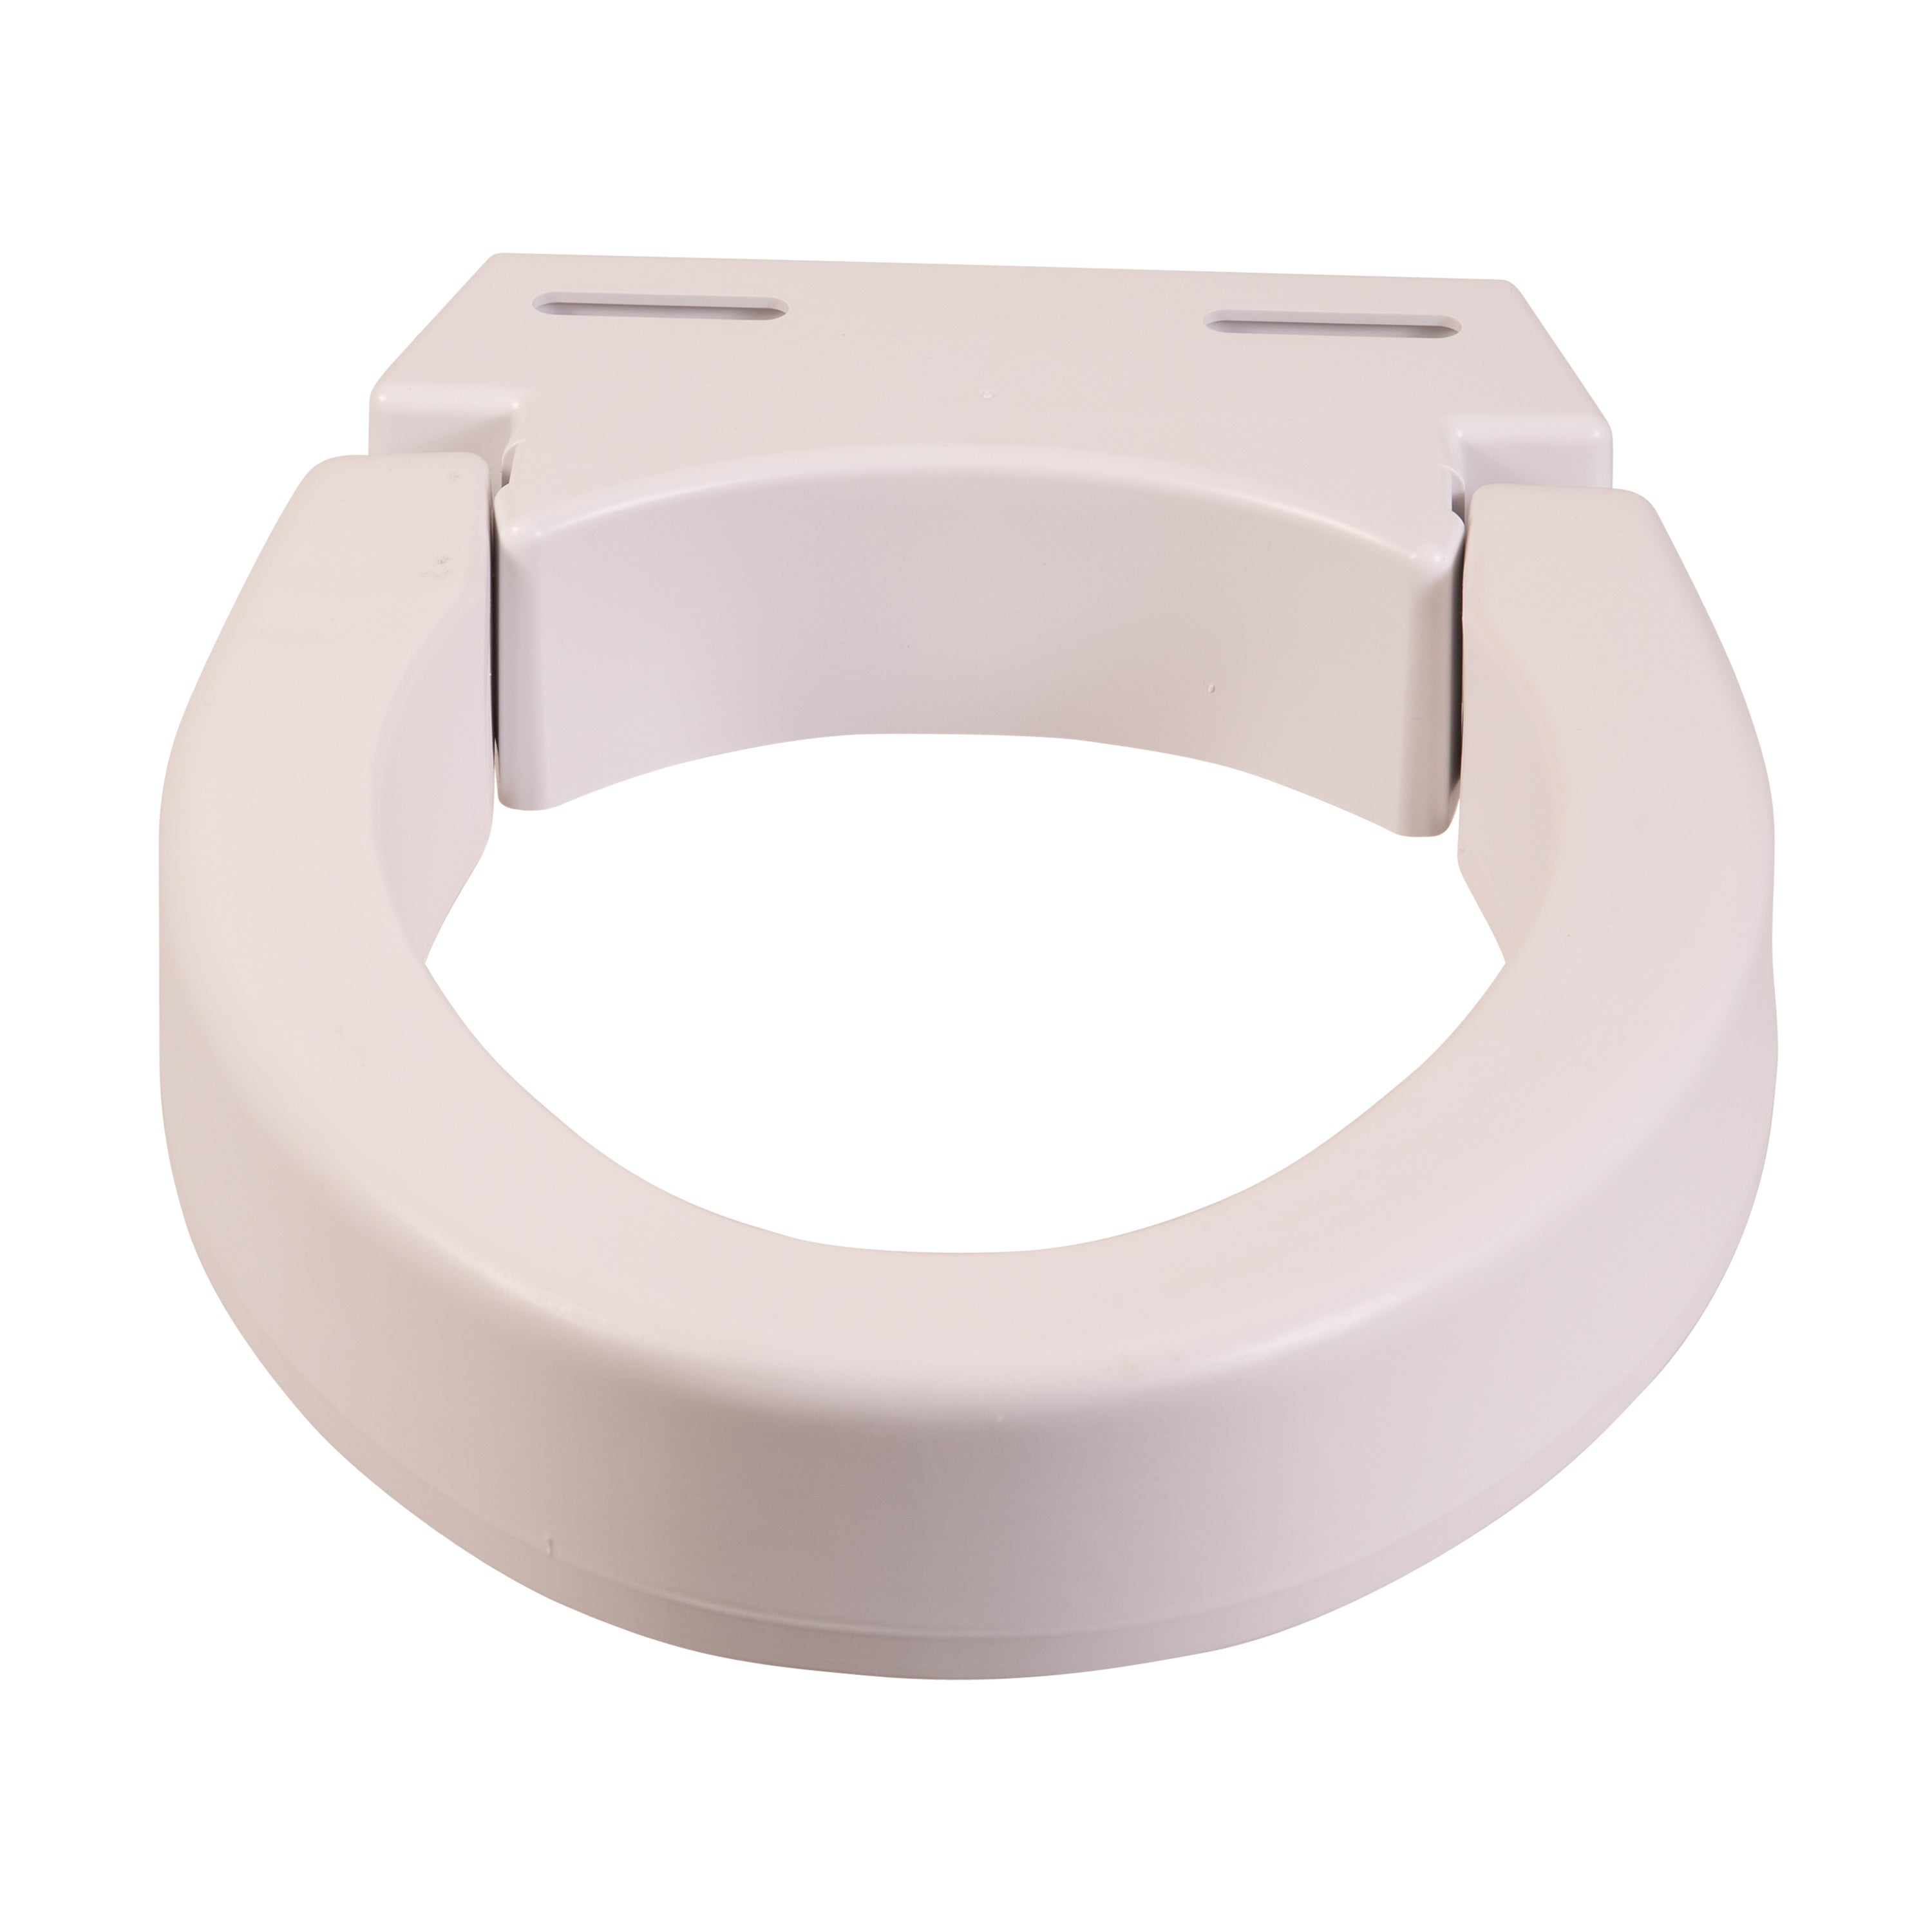 DMI Hinged Elevated Toilet Seat AM-641-2571-0000